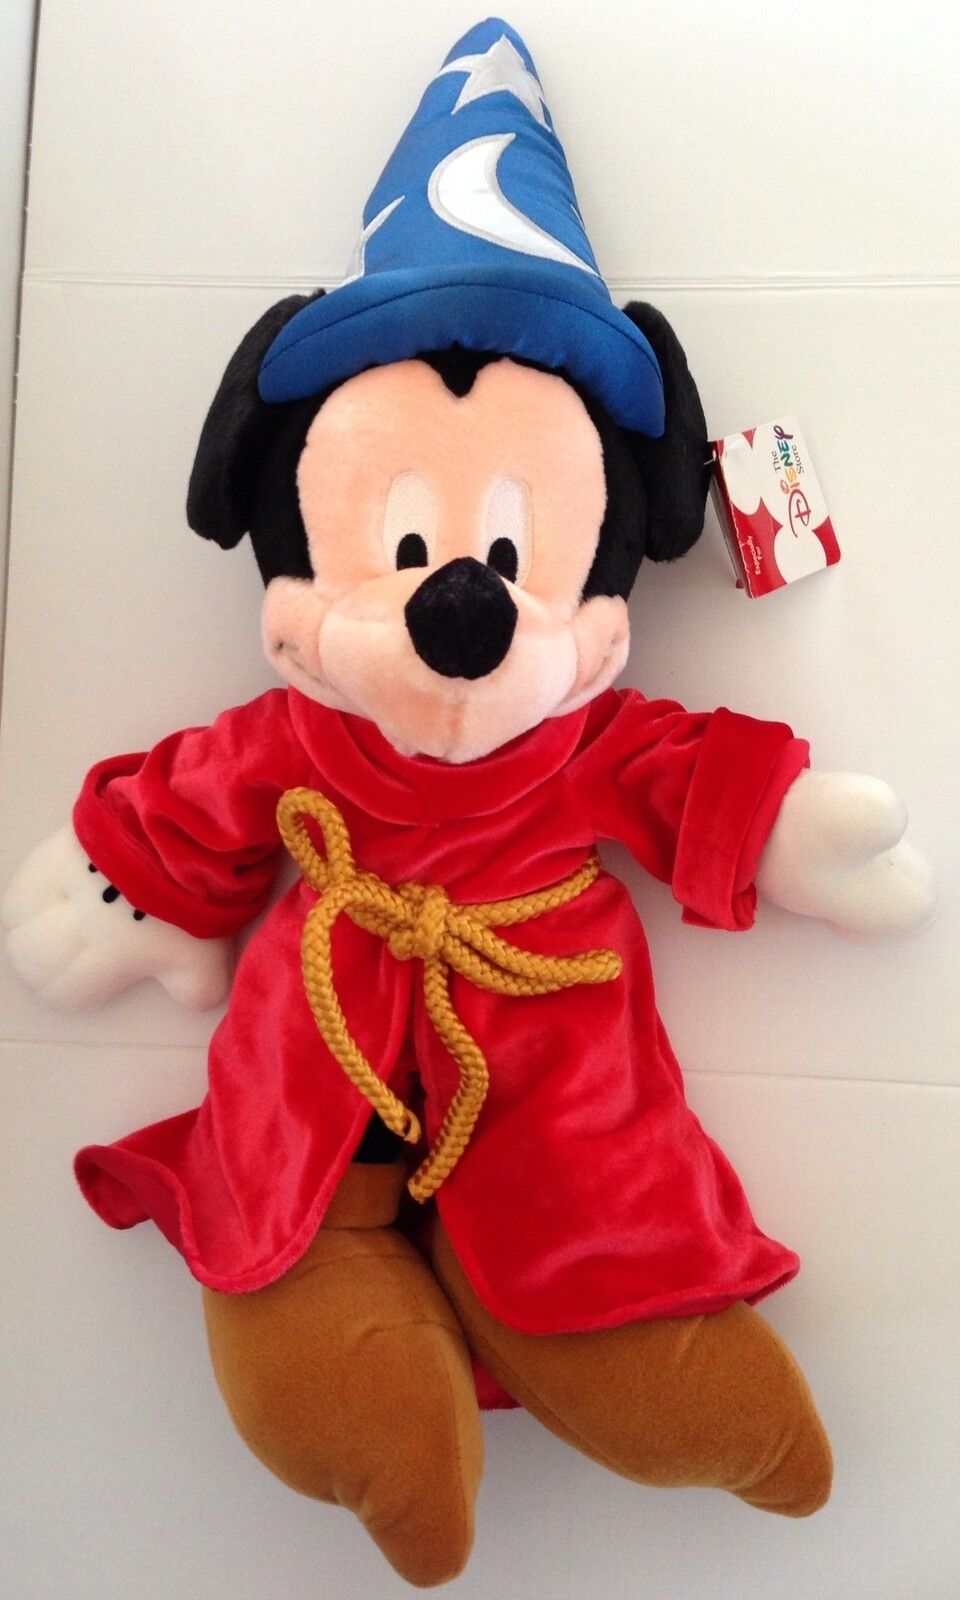 **New with Tag** Disney Store Sorcerer Mickey 13\